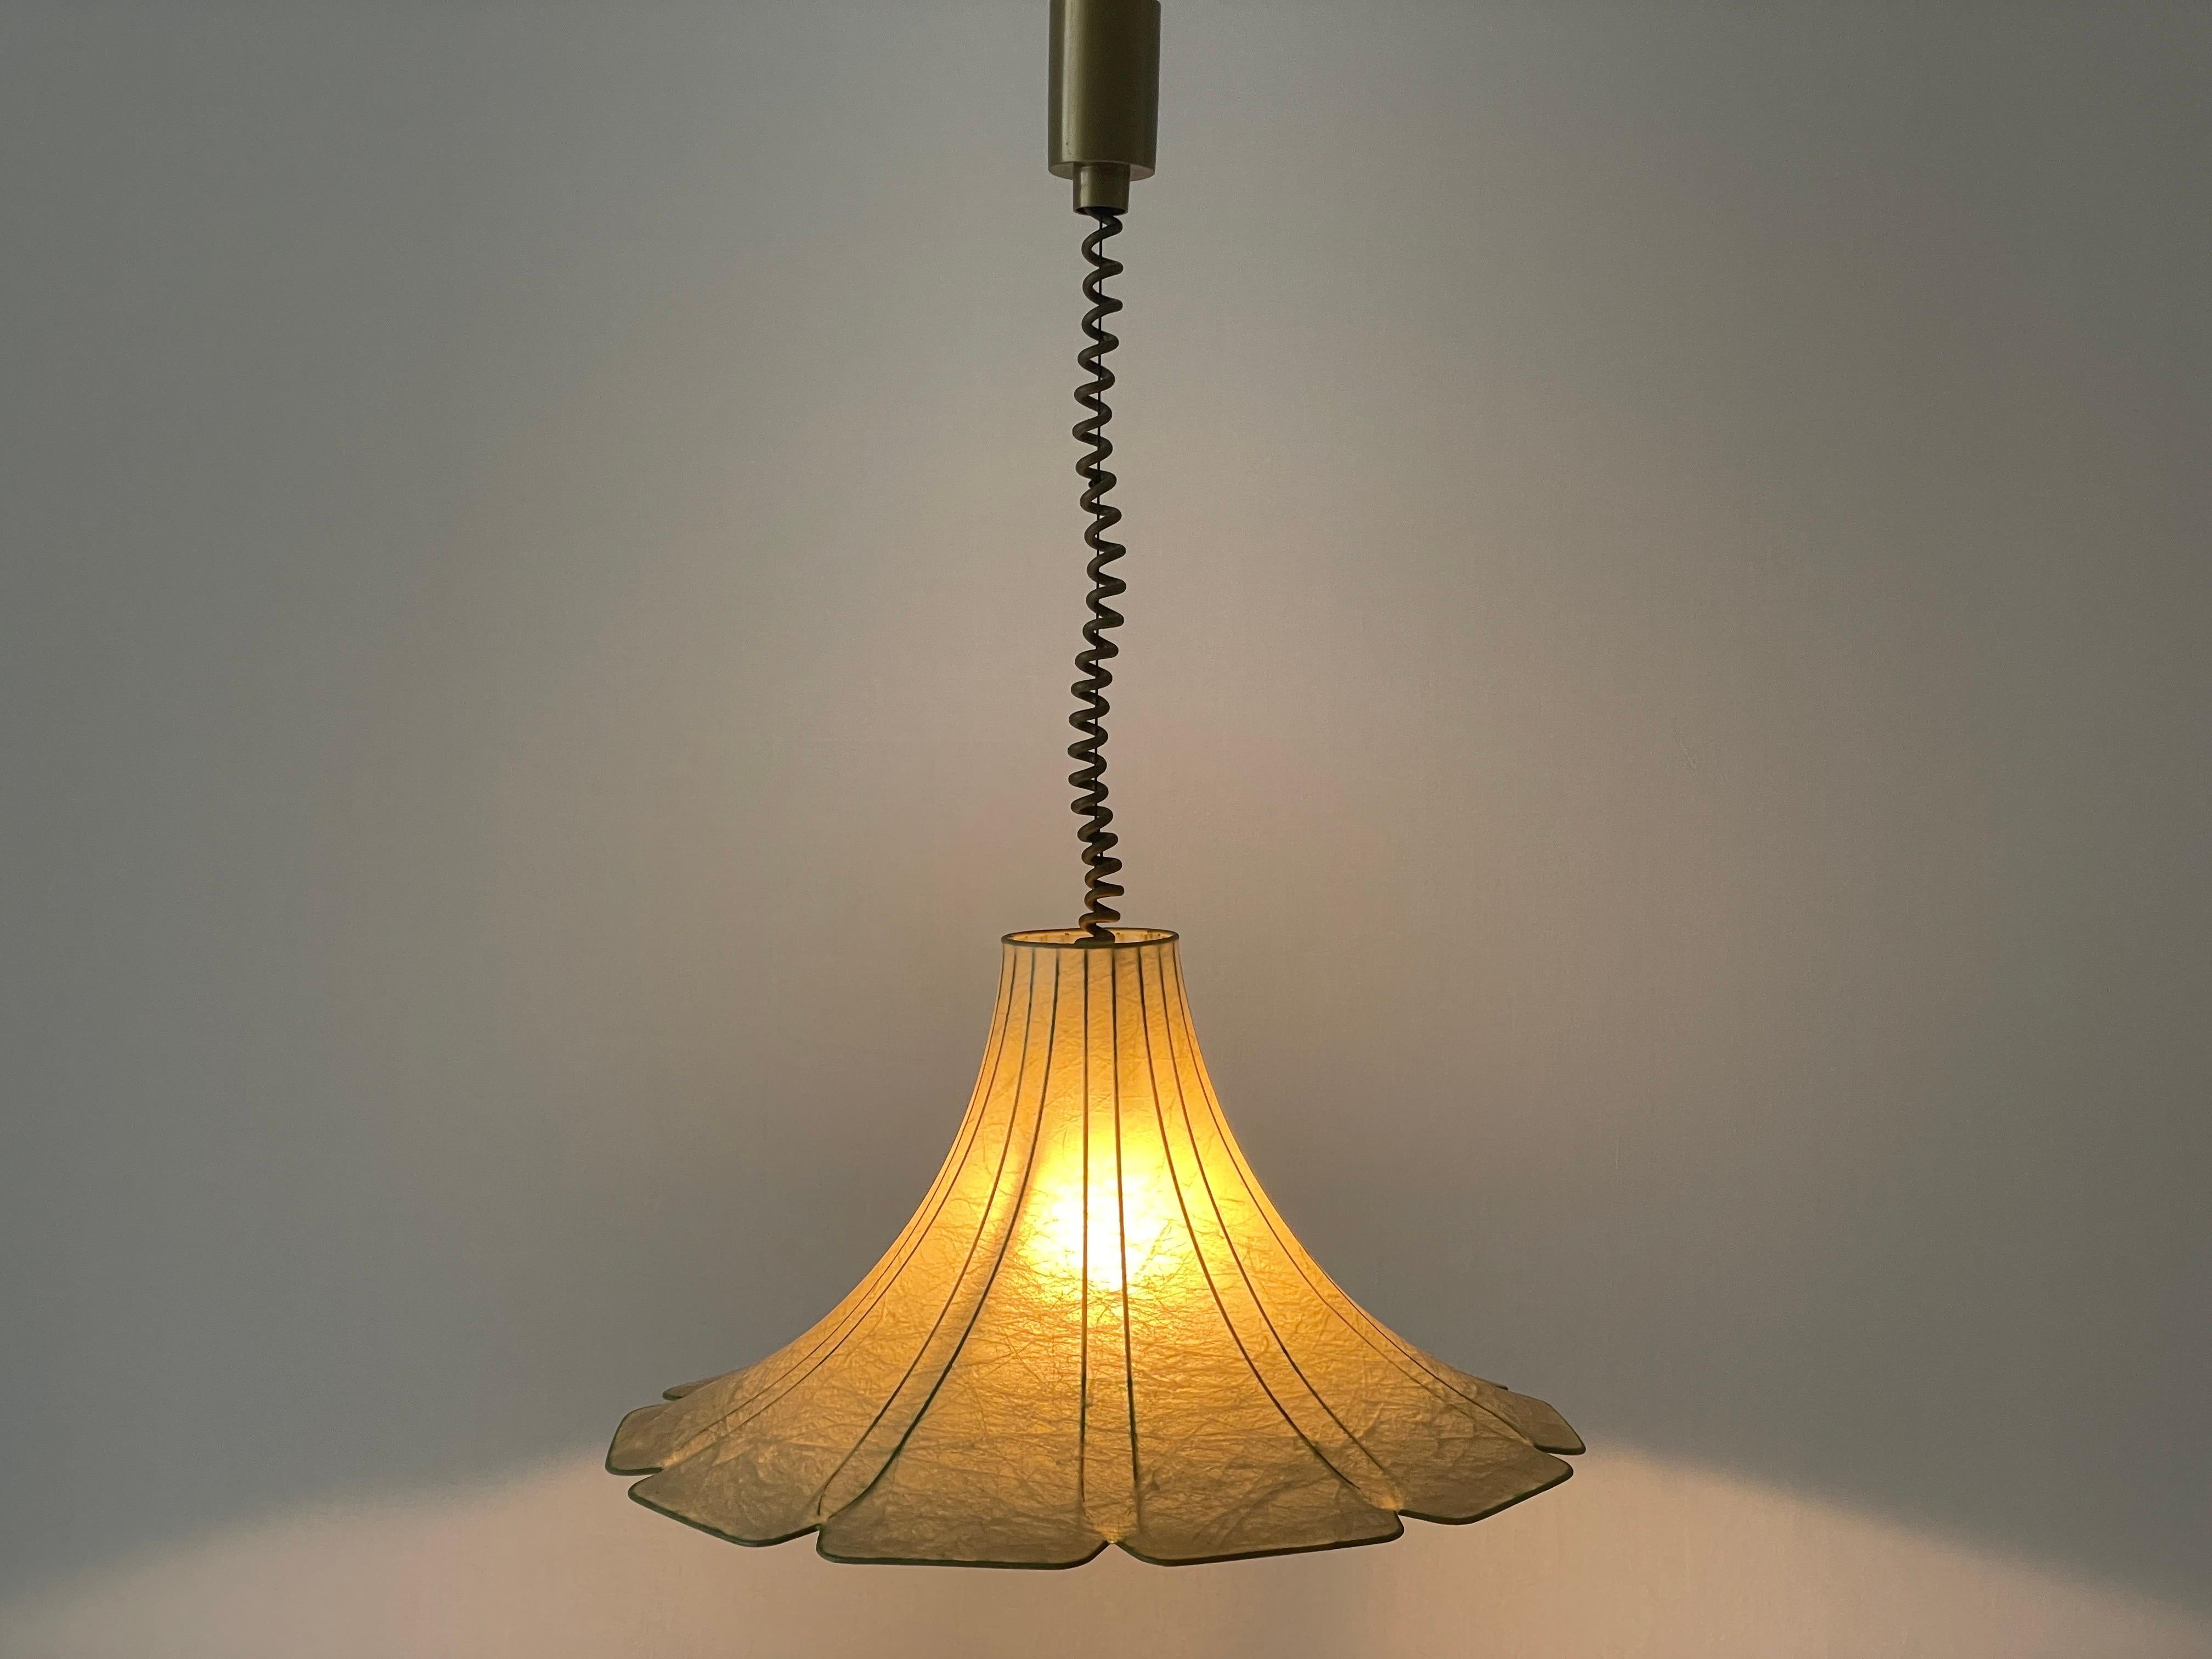 Tulip Design Cocoon Adjustable Height Pendant Lamp by Goldkant, 1960s, Germany For Sale 6